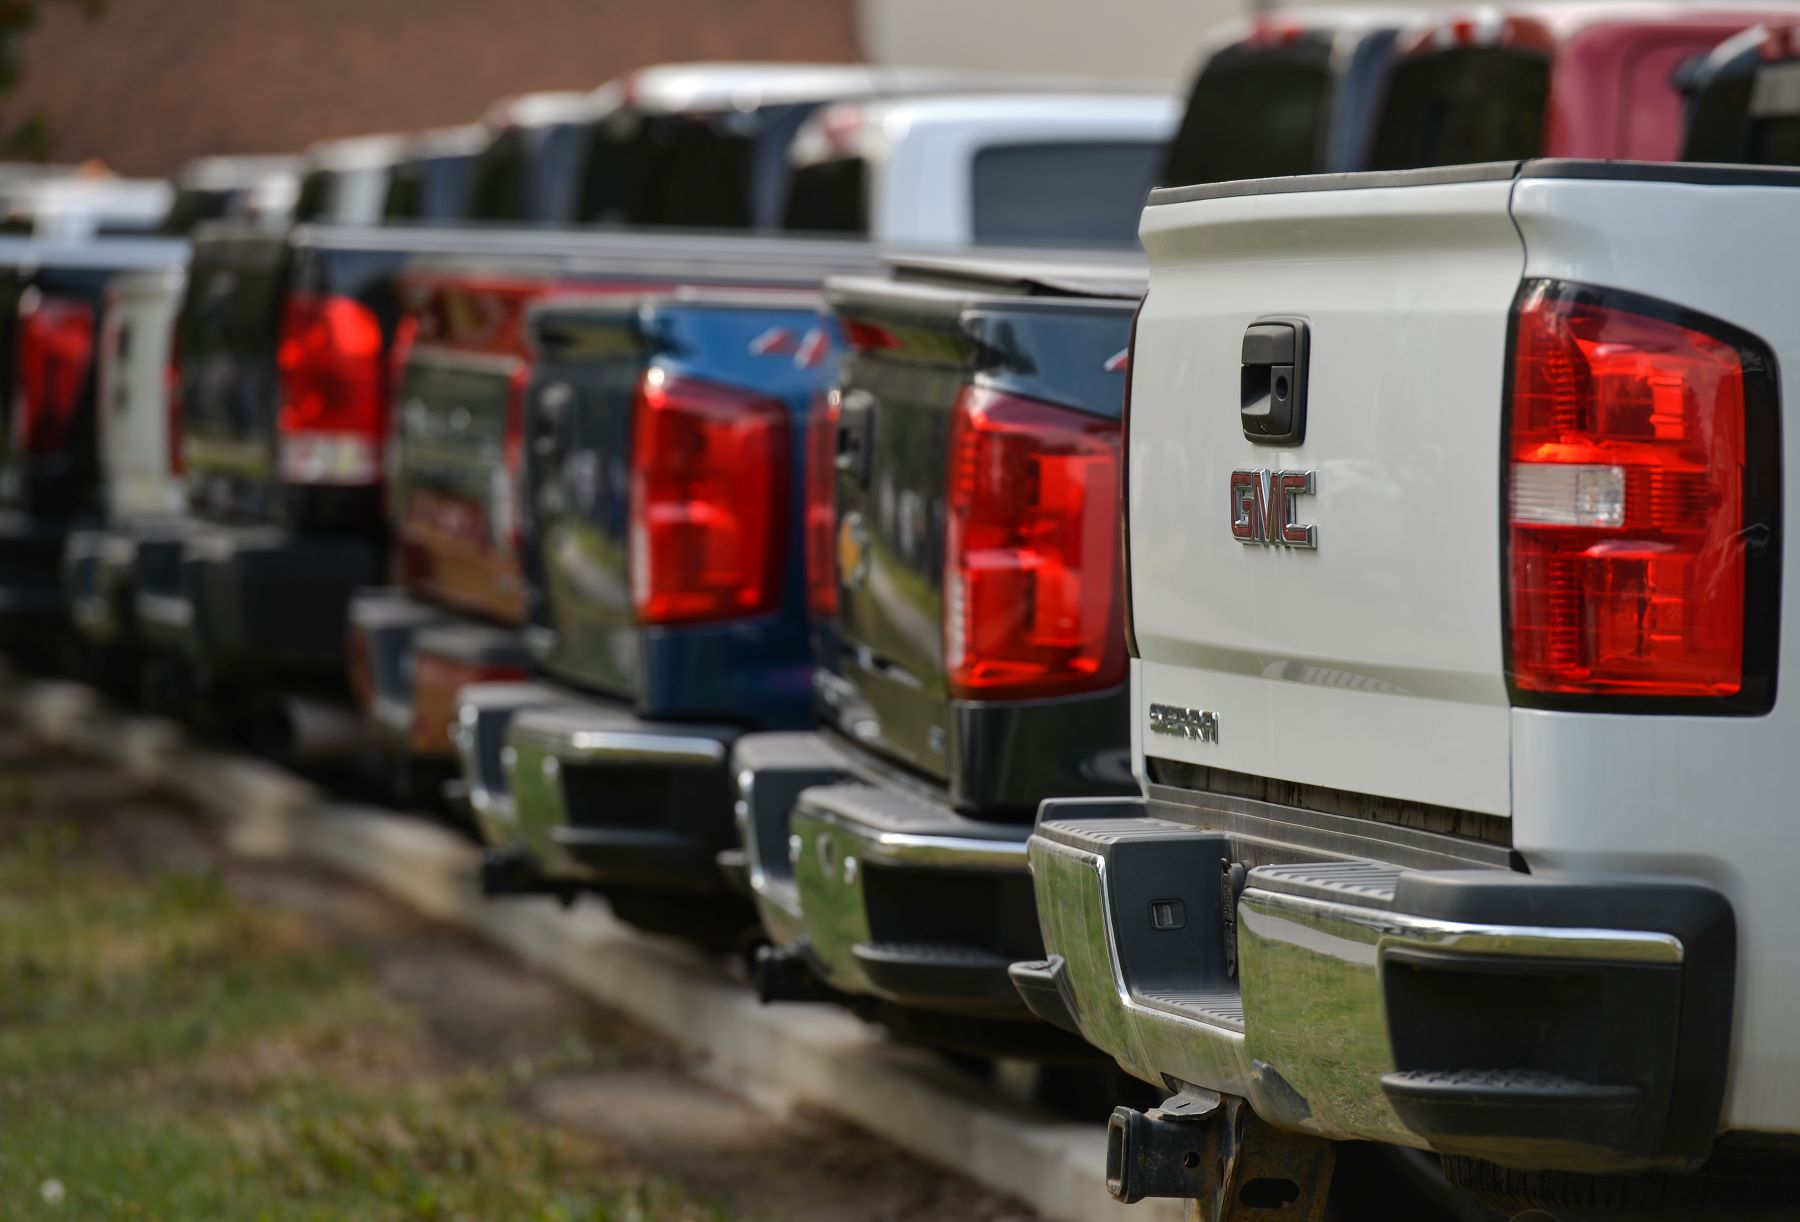 A lineup of GMC pickup truck rear ends and tailgates